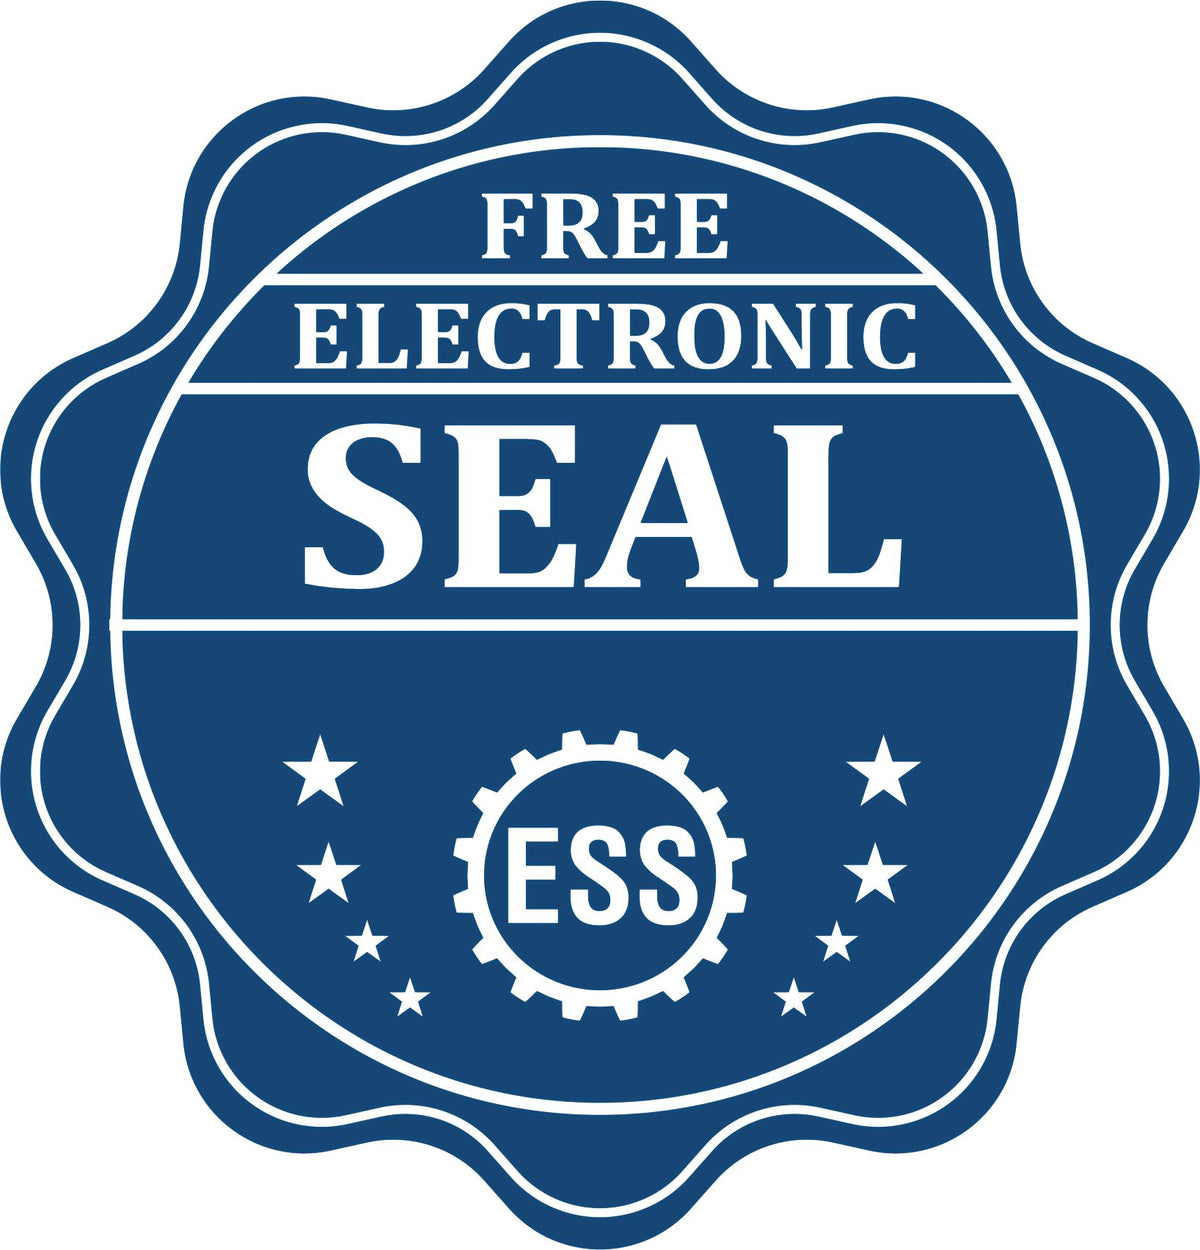 A badge showing a free electronic seal for the Long Reach Montana Geology Seal with stars and the ESS gear on the emblem.